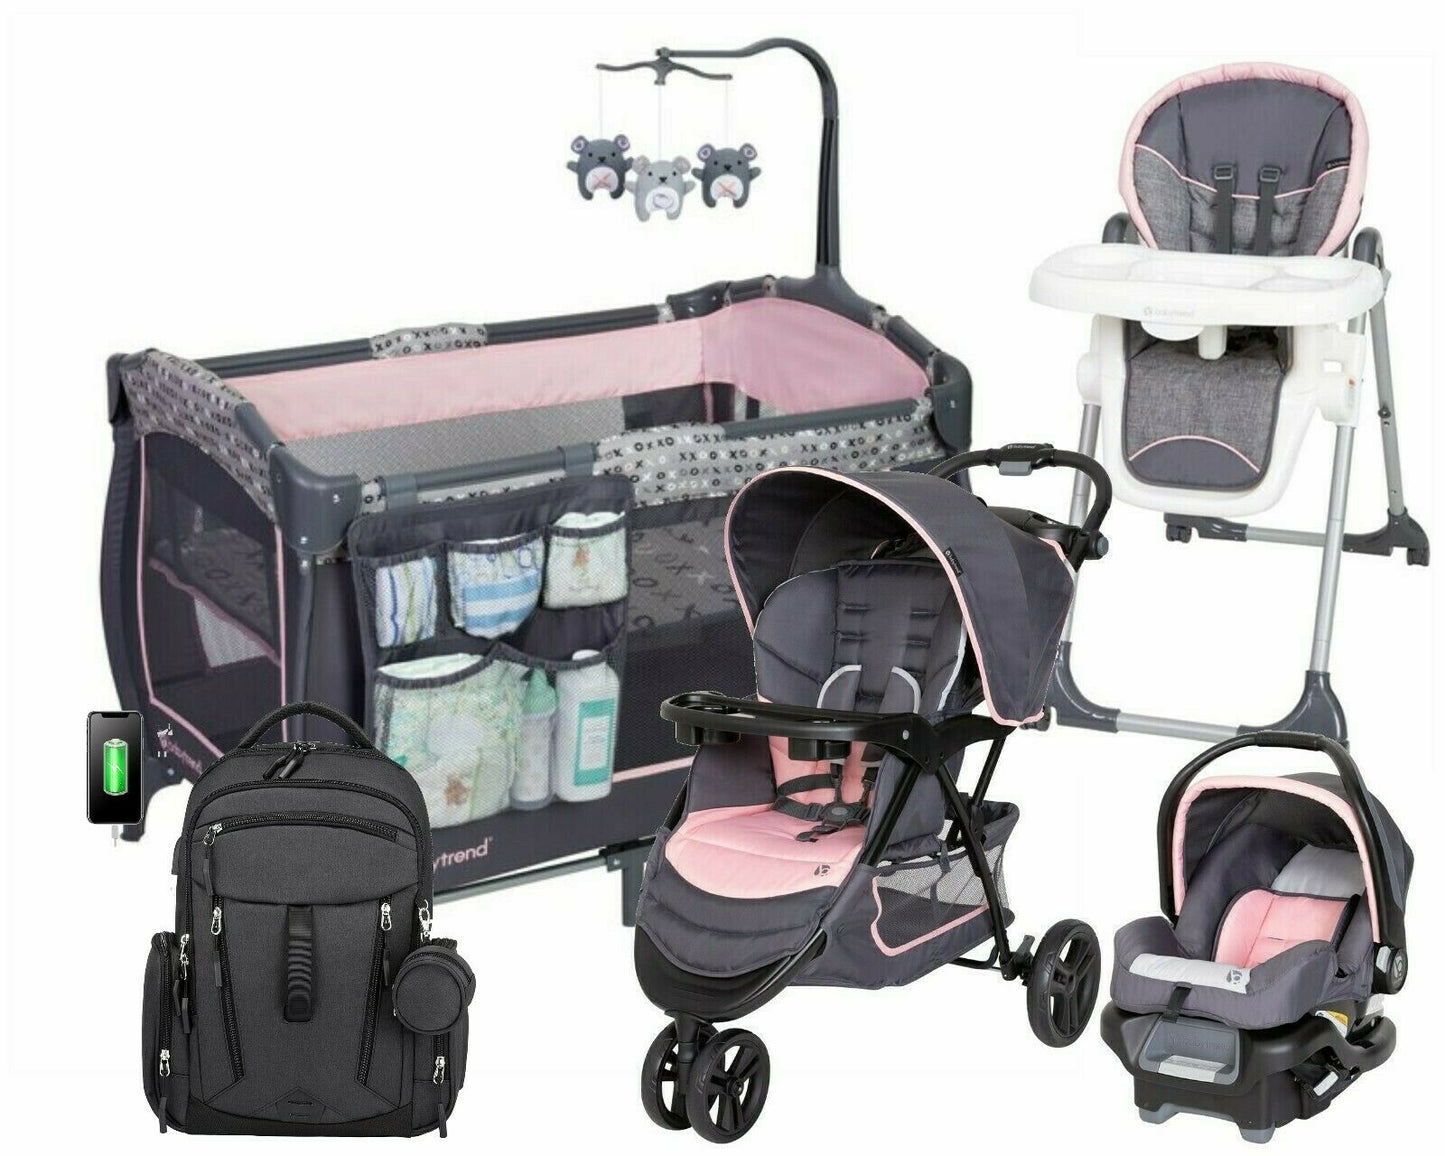 Combo Baby Stroller with Car Seat Travel System Playard High Chair Diaper Bag